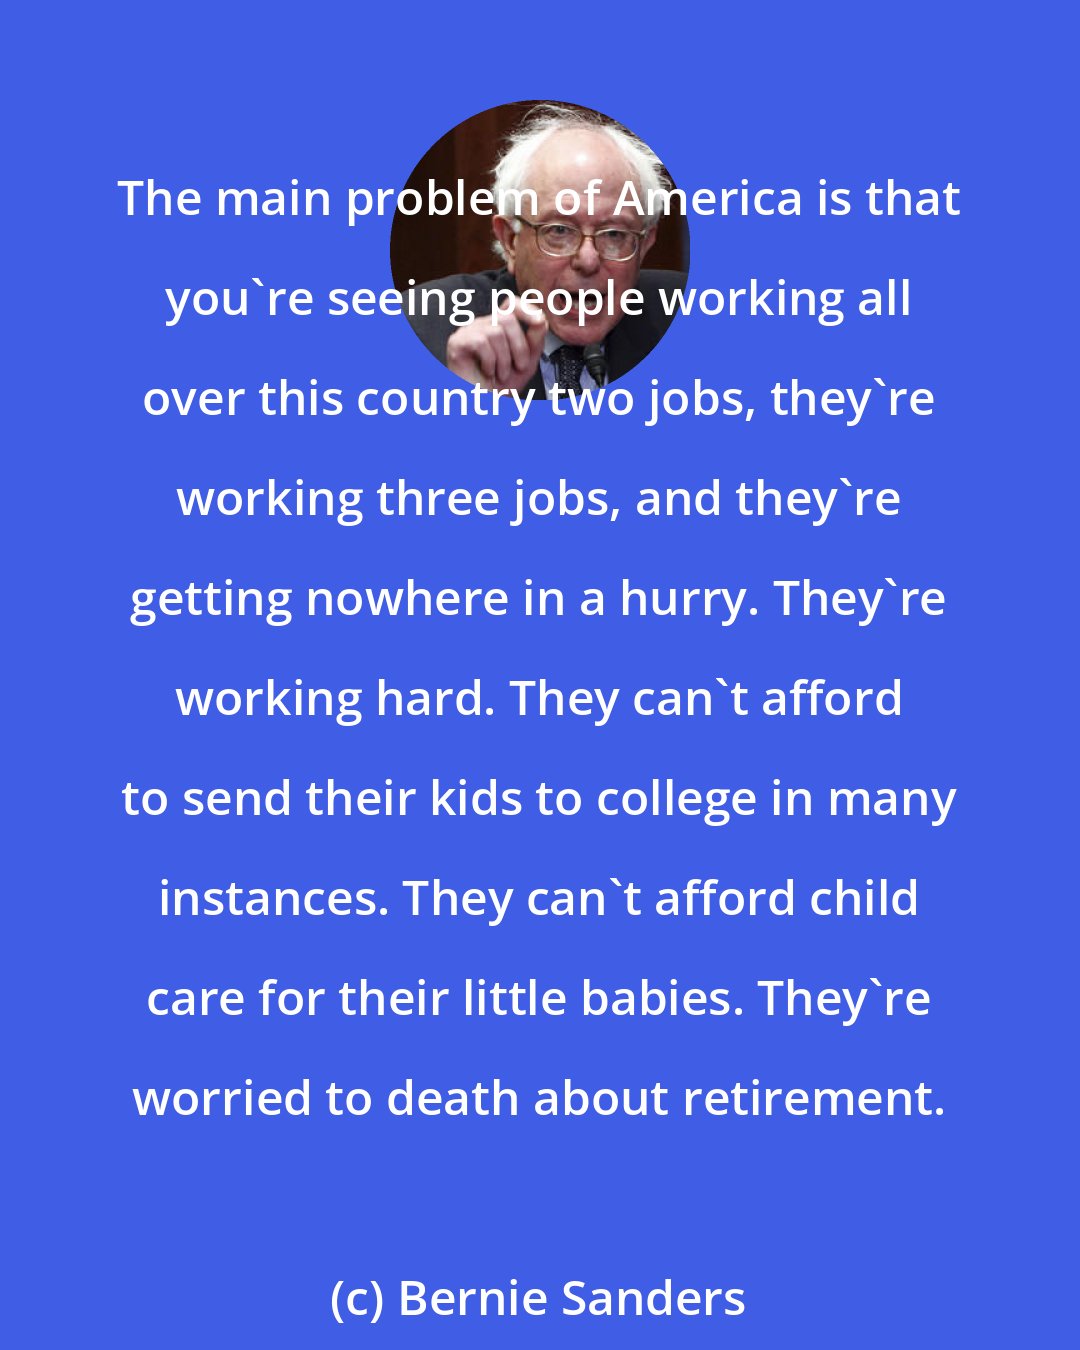 Bernie Sanders: The main problem of America is that you're seeing people working all over this country two jobs, they're working three jobs, and they're getting nowhere in a hurry. They're working hard. They can't afford to send their kids to college in many instances. They can't afford child care for their little babies. They're worried to death about retirement.